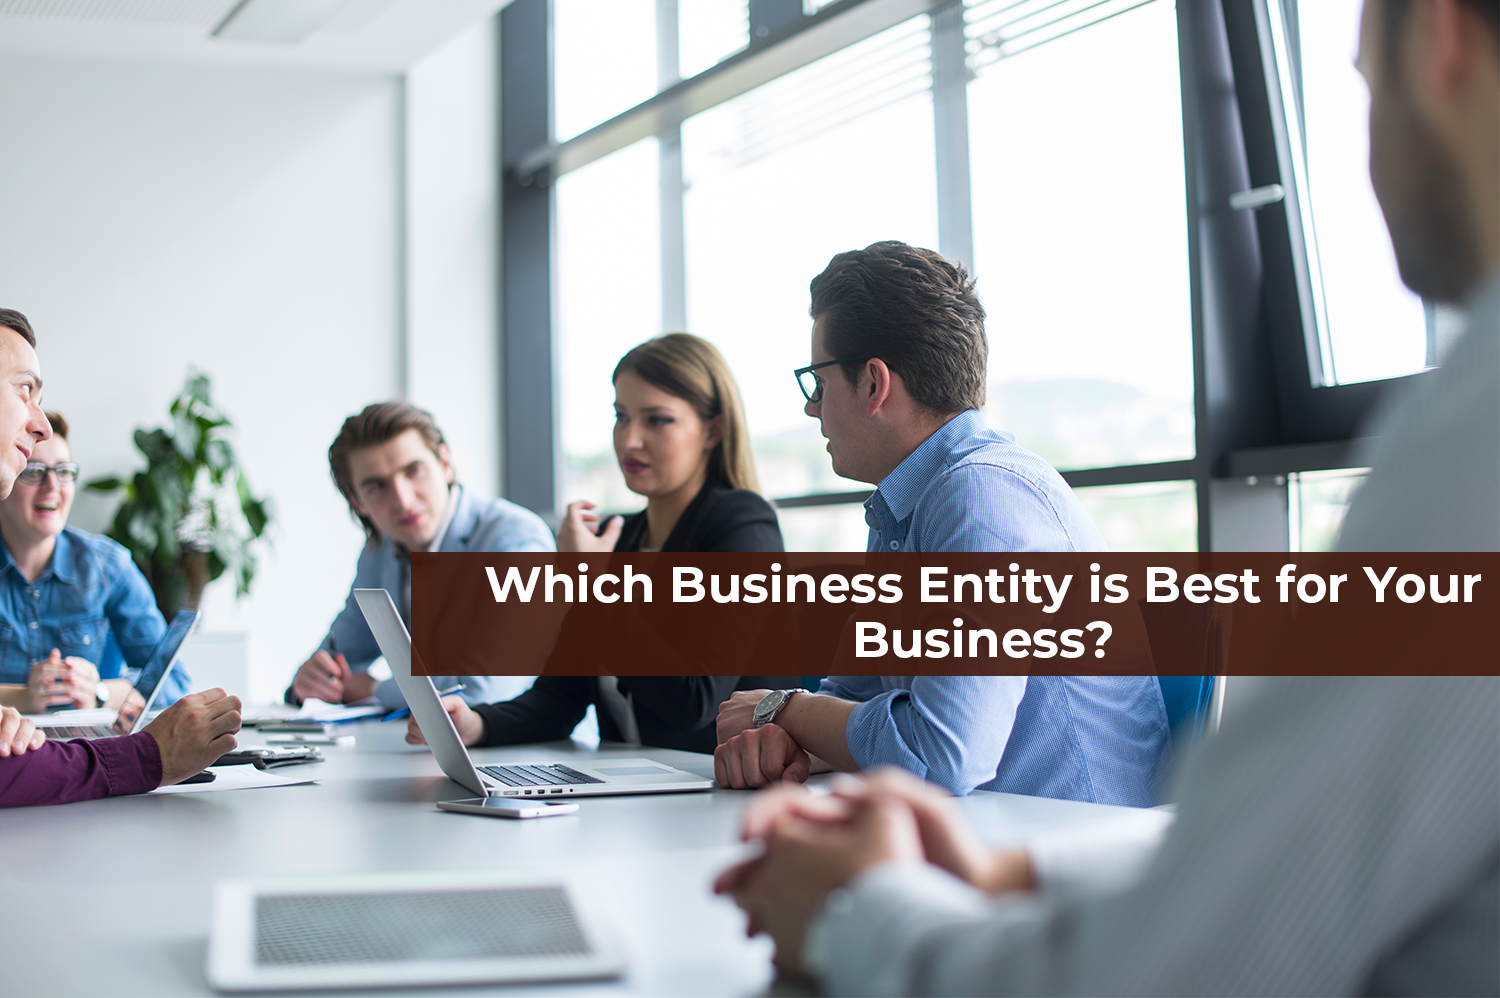 A group of people at a business meeting, trying to decide what business entity is best for their business.